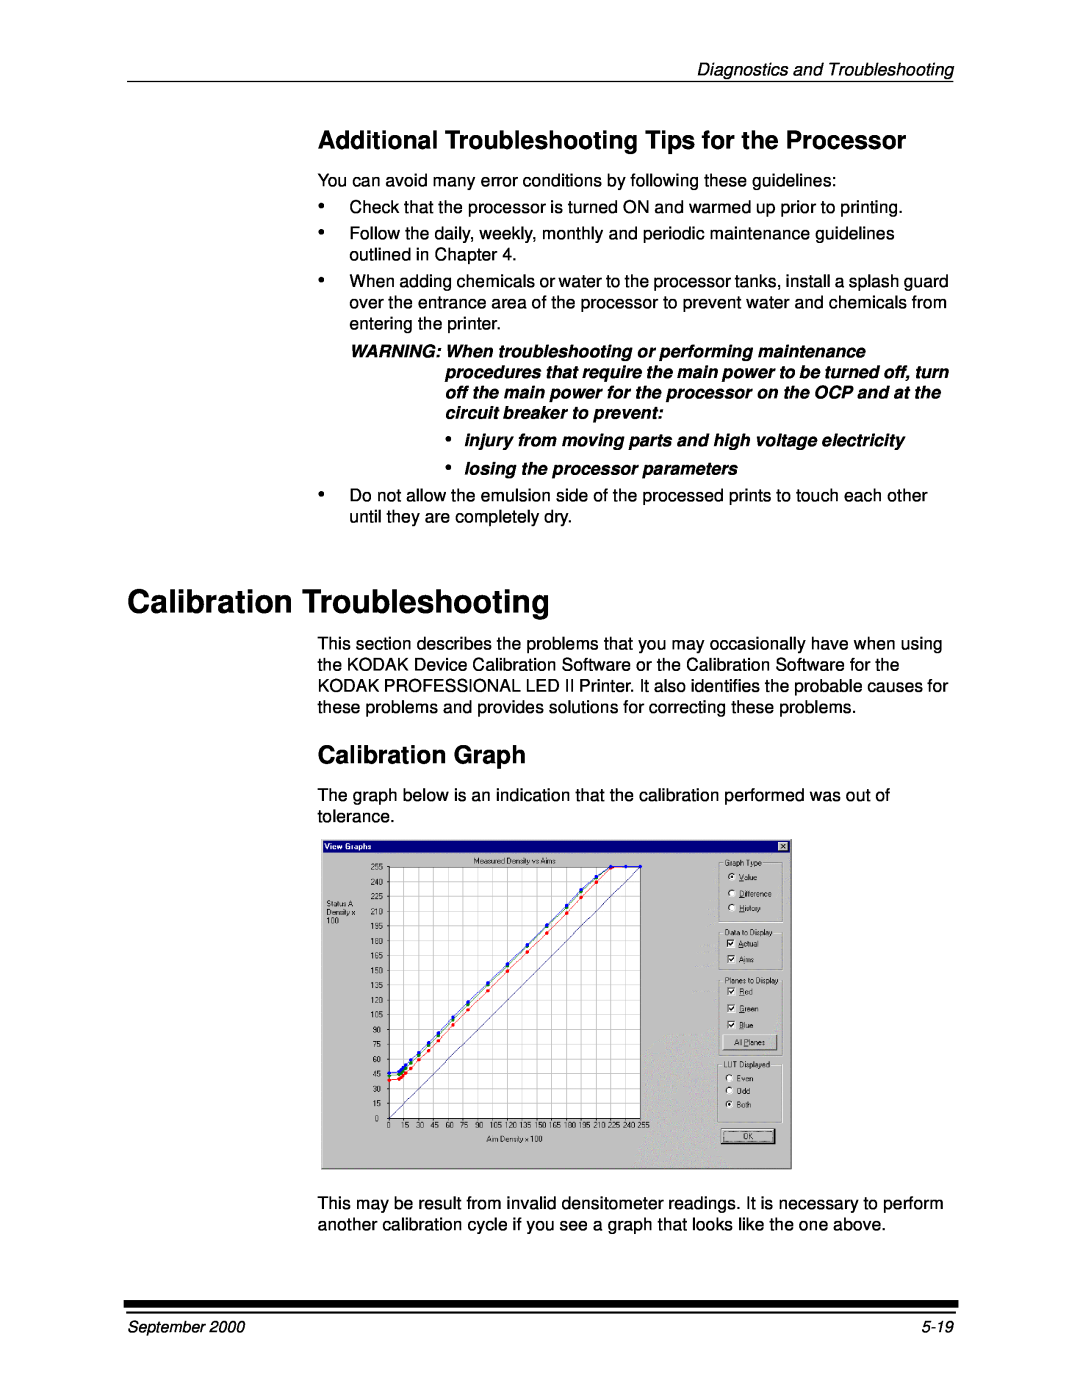 Kodak 20P manual Calibration Troubleshooting, Additional Troubleshooting Tips for the Processor, Calibration Graph 